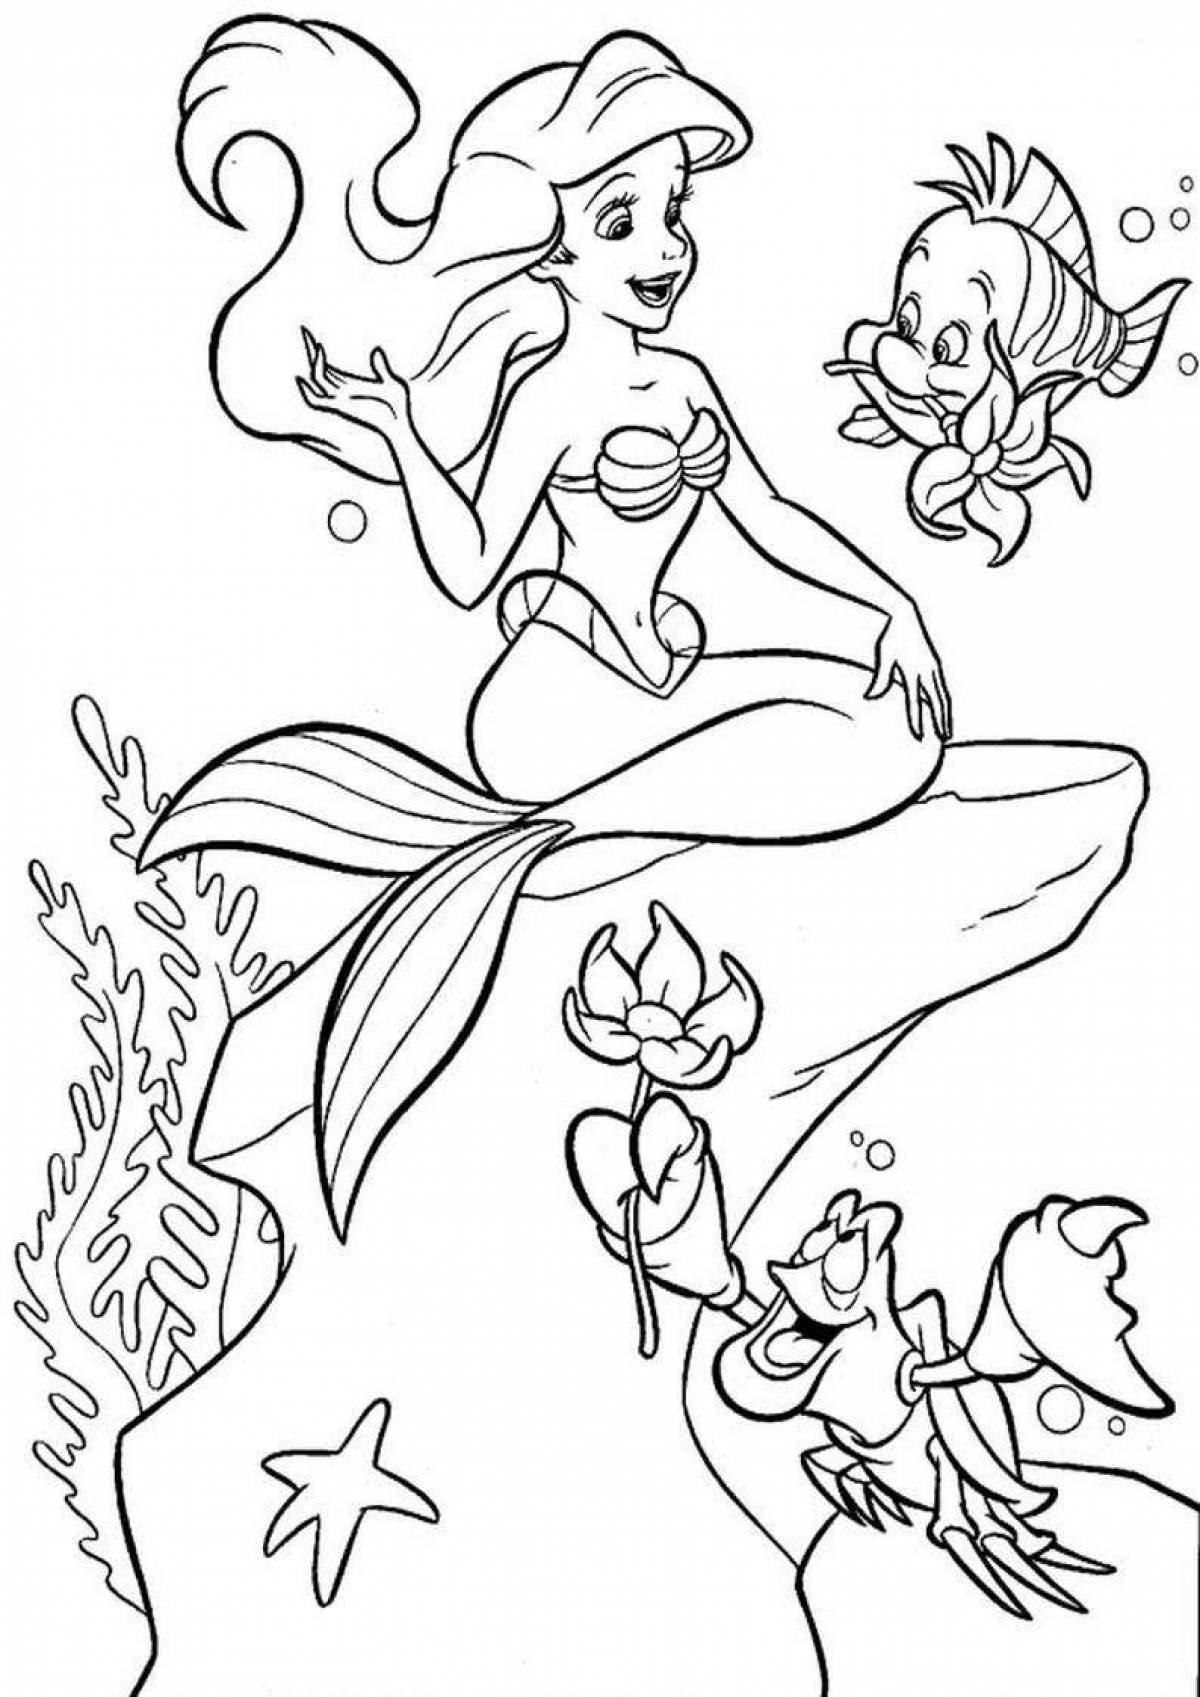 Exquisite ariel little mermaid coloring book for kids